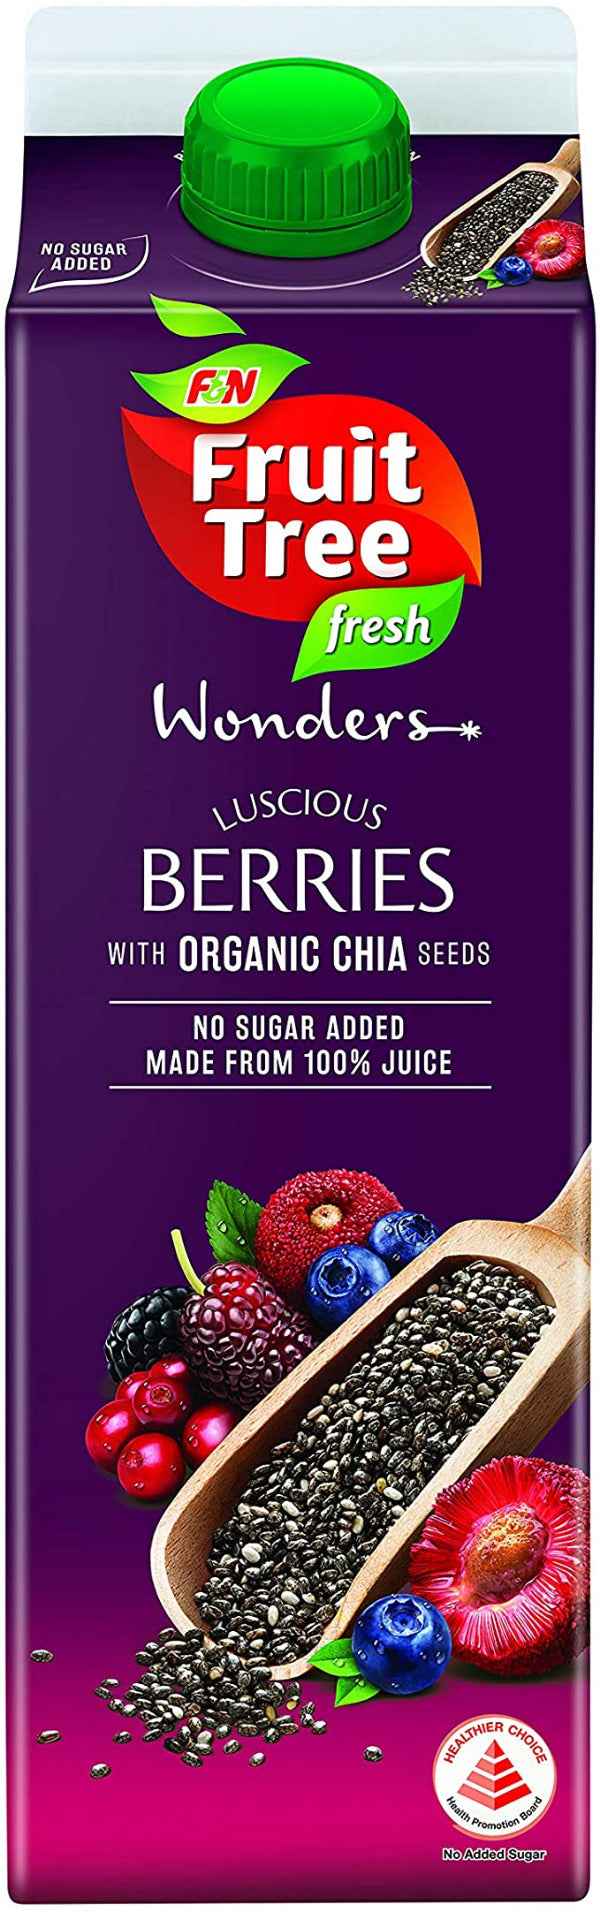 F&N Fruit Tree Berries With Chia NAS (1litre)